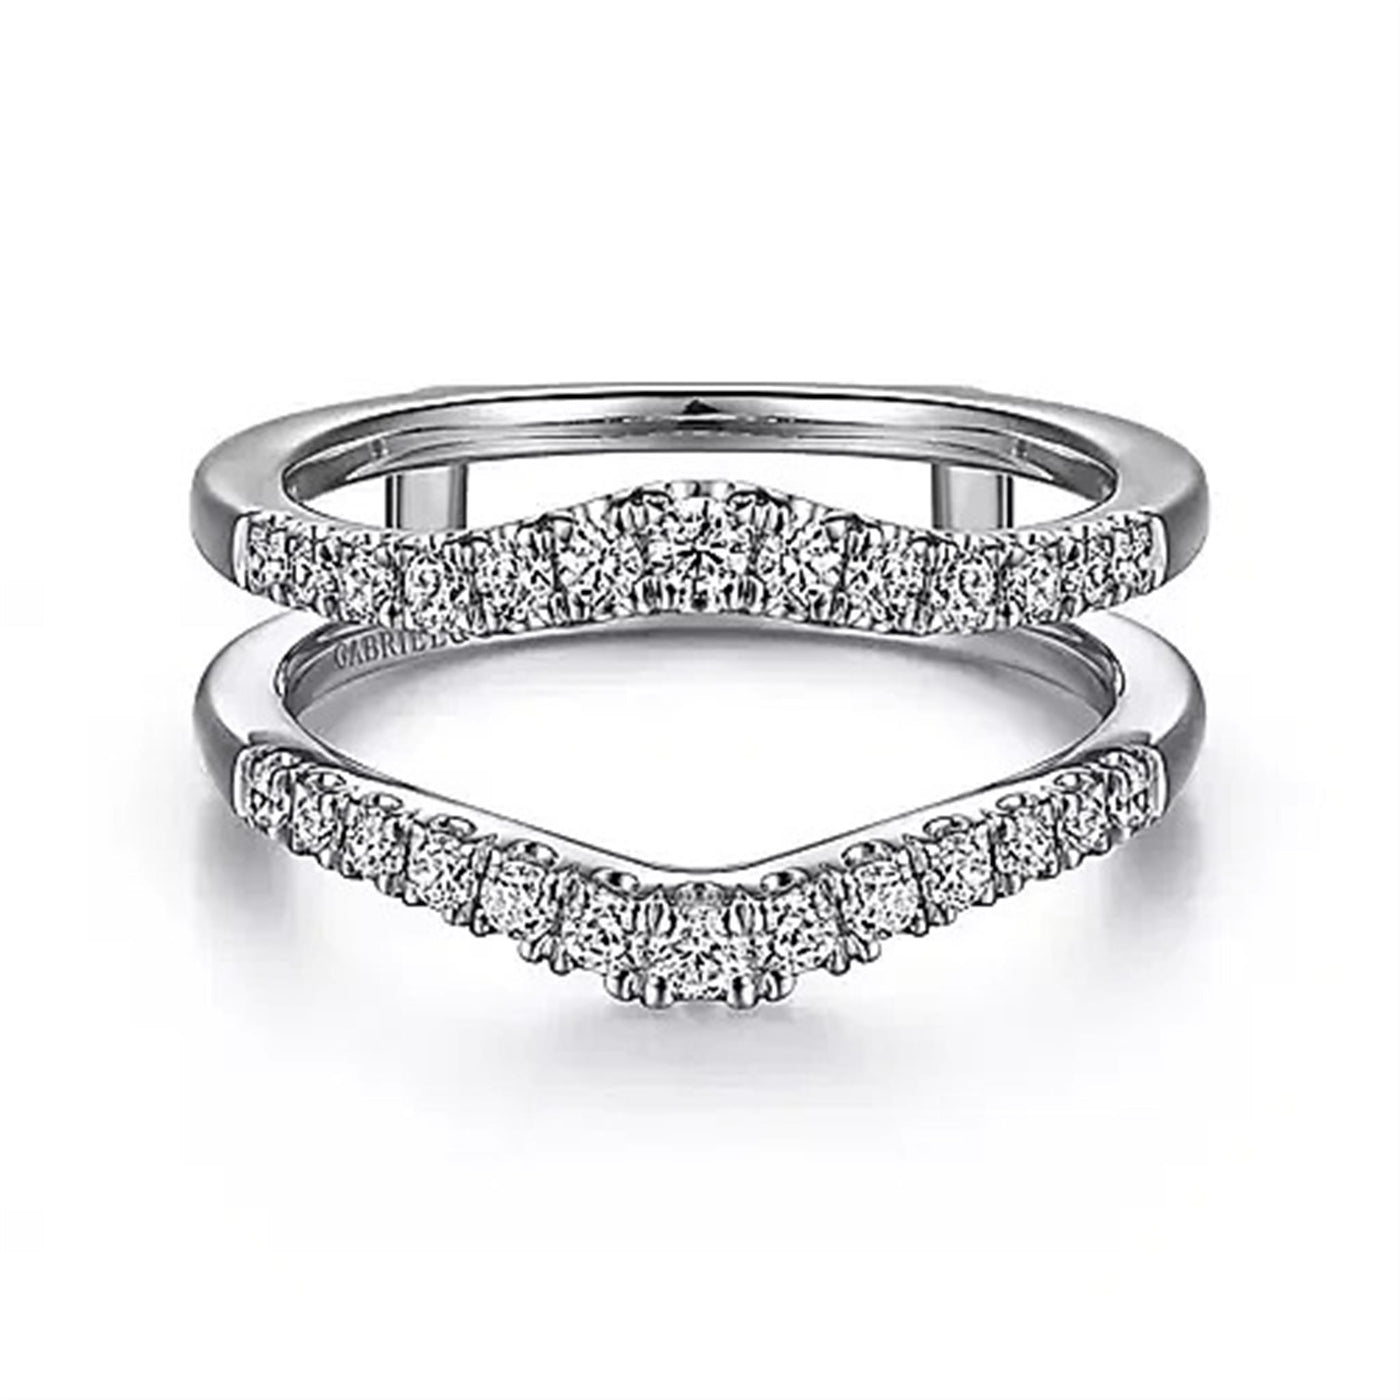 Gabriel - Contemporary Collection 14K White Gold .45ctw Diamond Ring Guard